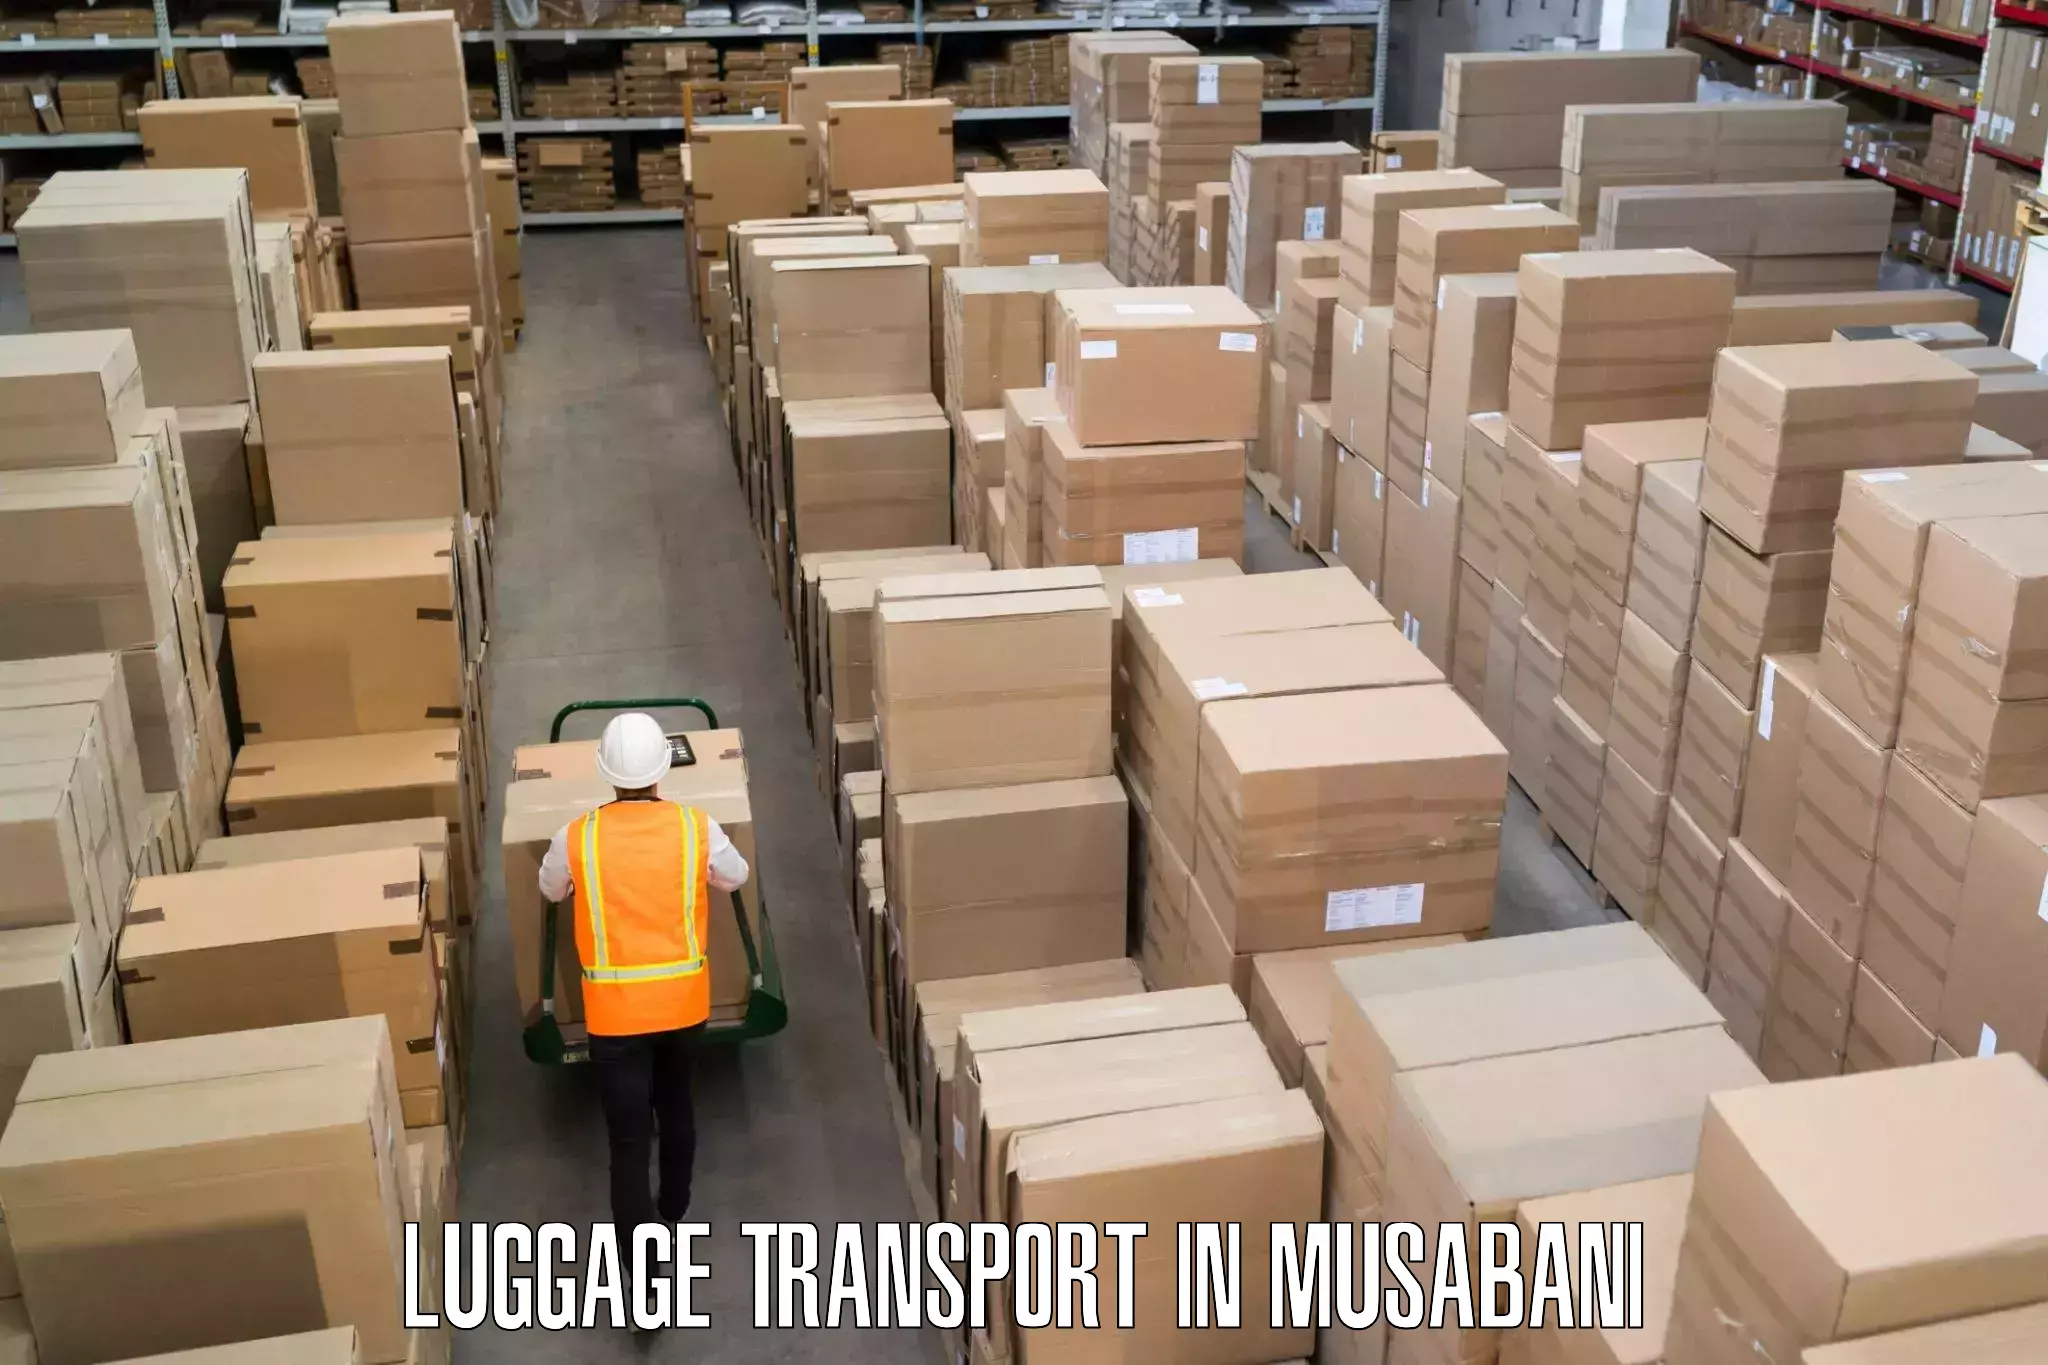 Baggage transport services in Musabani